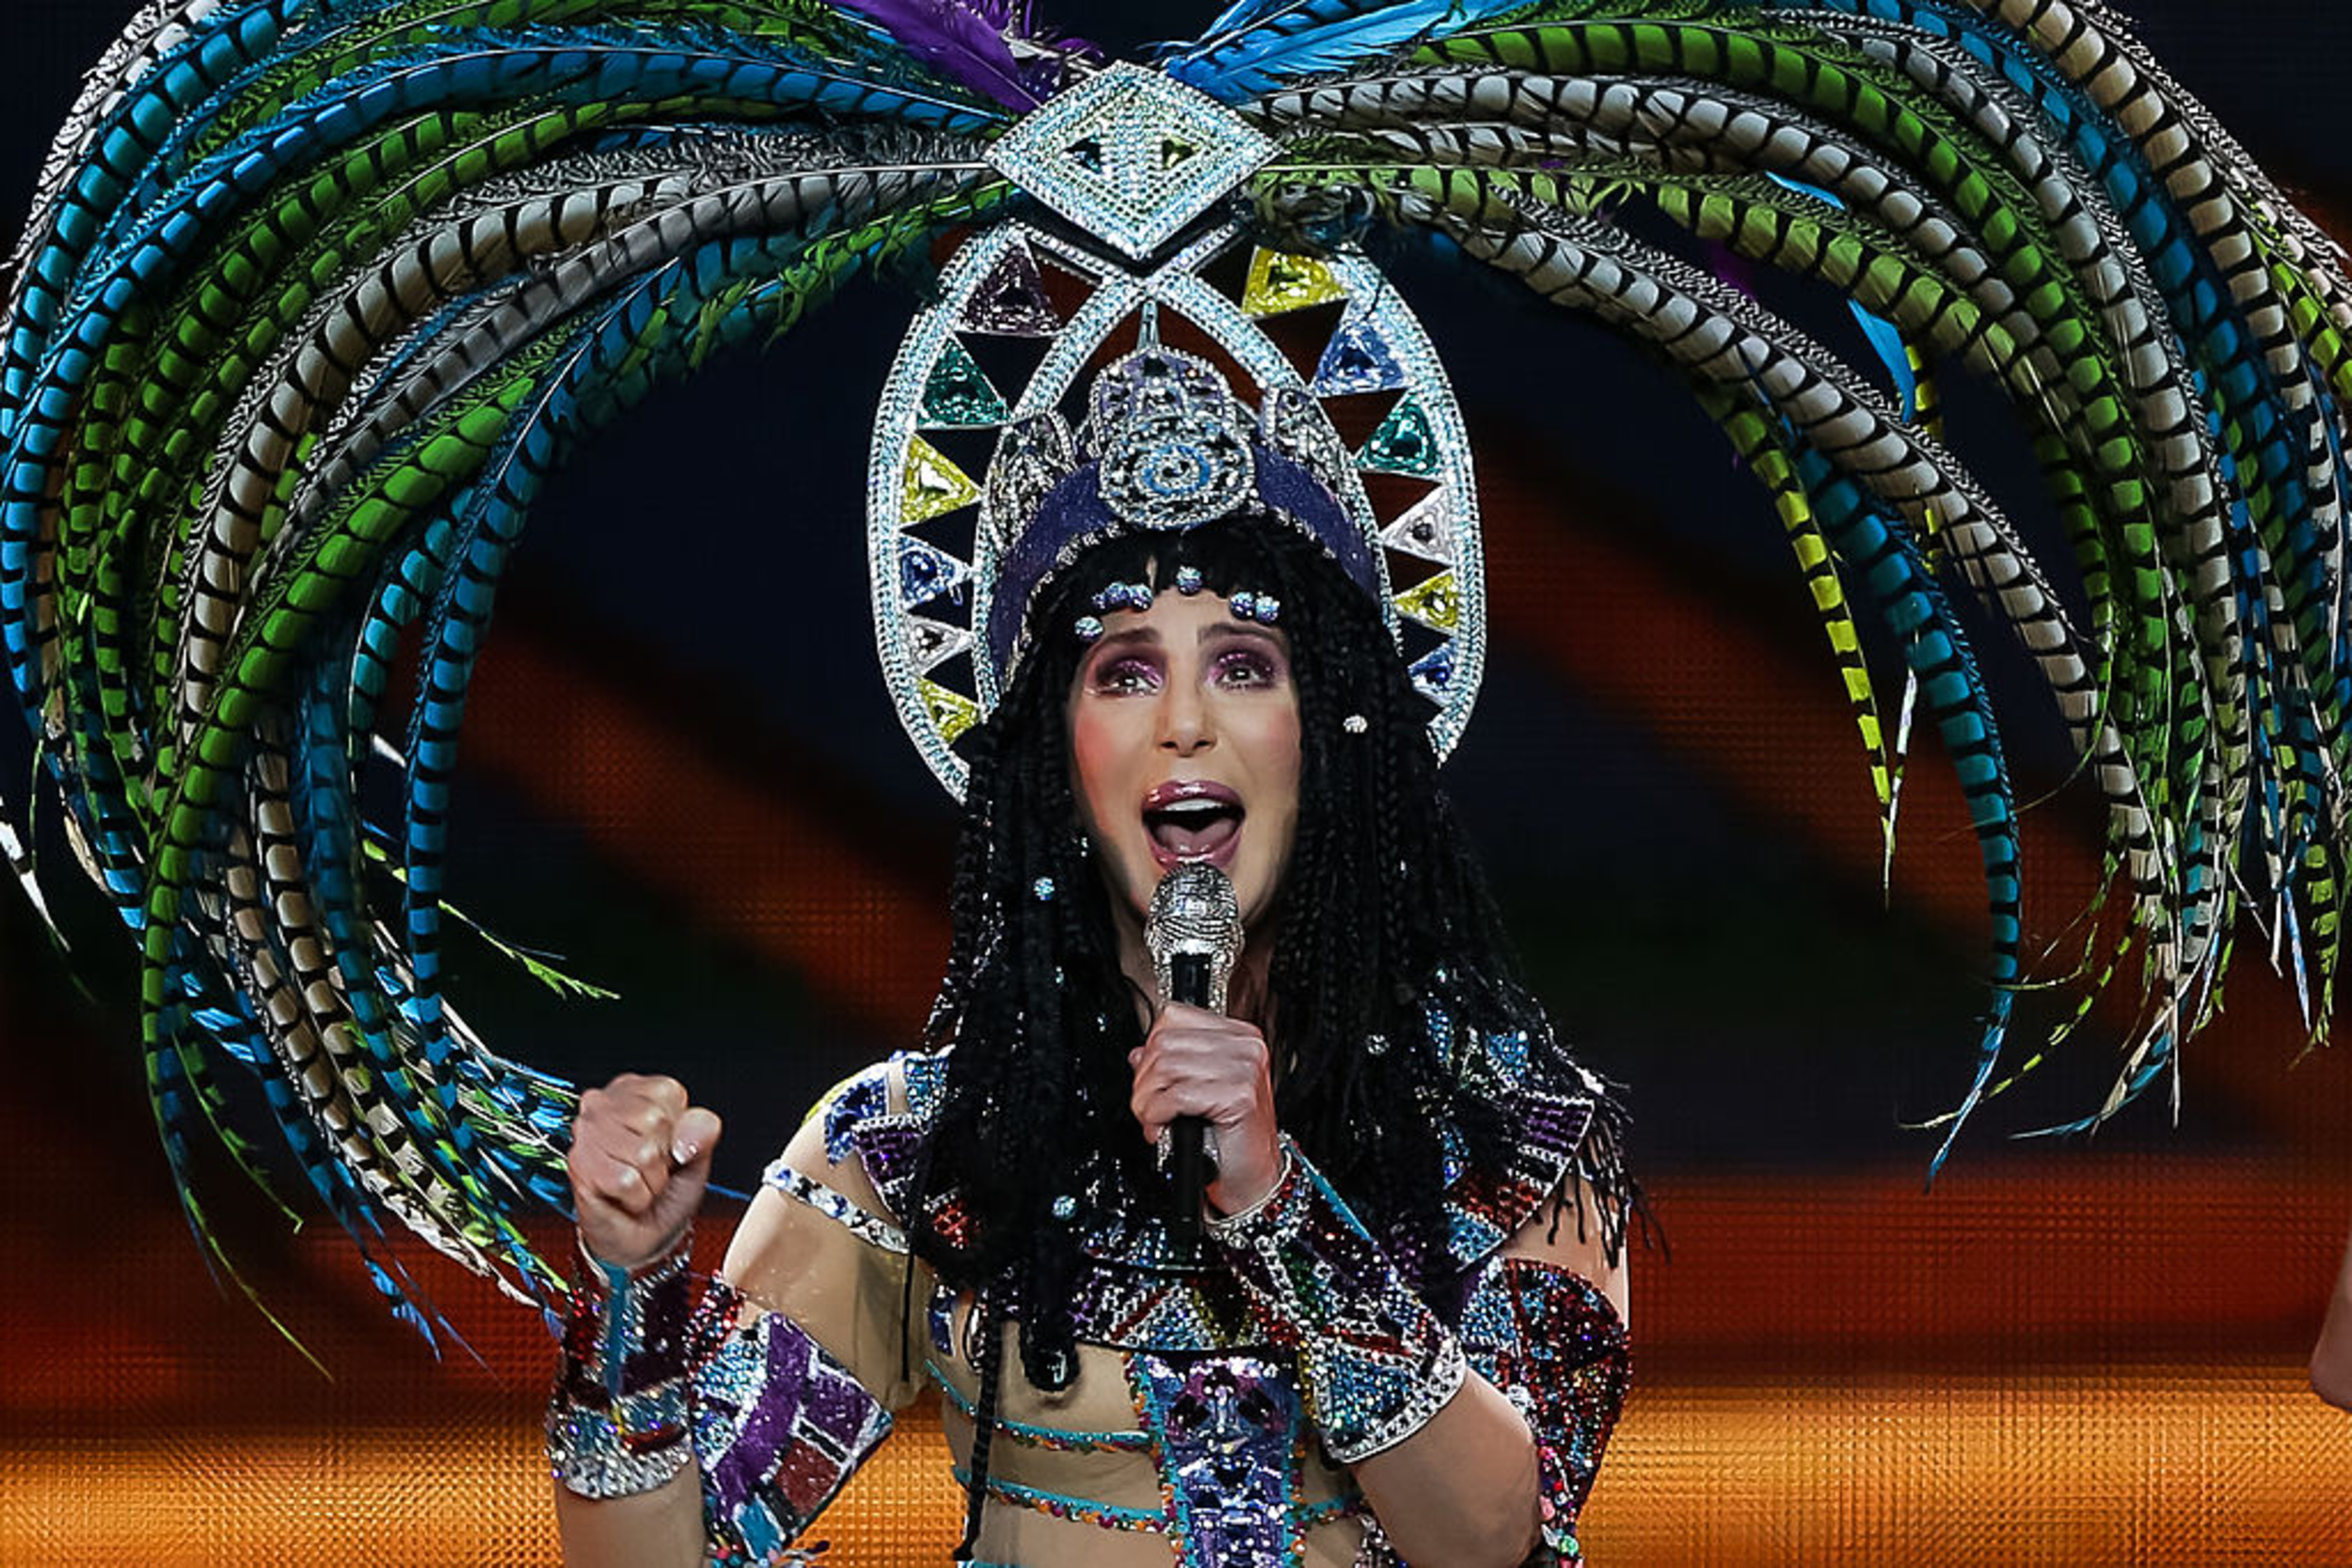 <p>In 1998, Cher had nightclubs in a frenzy with her hit song <a href="https://www.youtube.com/watch?v=nZXRV4MezEw" rel="noopener noreferrer">“Believe.”</a> At the time, Cher used auto-tune and became an early rendering of other artists using the vocal effect in their music. On the track, Cher highlights trying to move on after dealing with a heartbreak. As she sings on the hook, "Do you believe in life after love? / I can feel something inside me say / I really don't think you're strong enough, no."</p><p>You may also like: <a href='https://www.yardbarker.com/entertainment/articles/the_best_sitcom_episodes_of_the_2000s_101923/s1__39078570'>The best sitcom episodes of the 2000s</a></p>